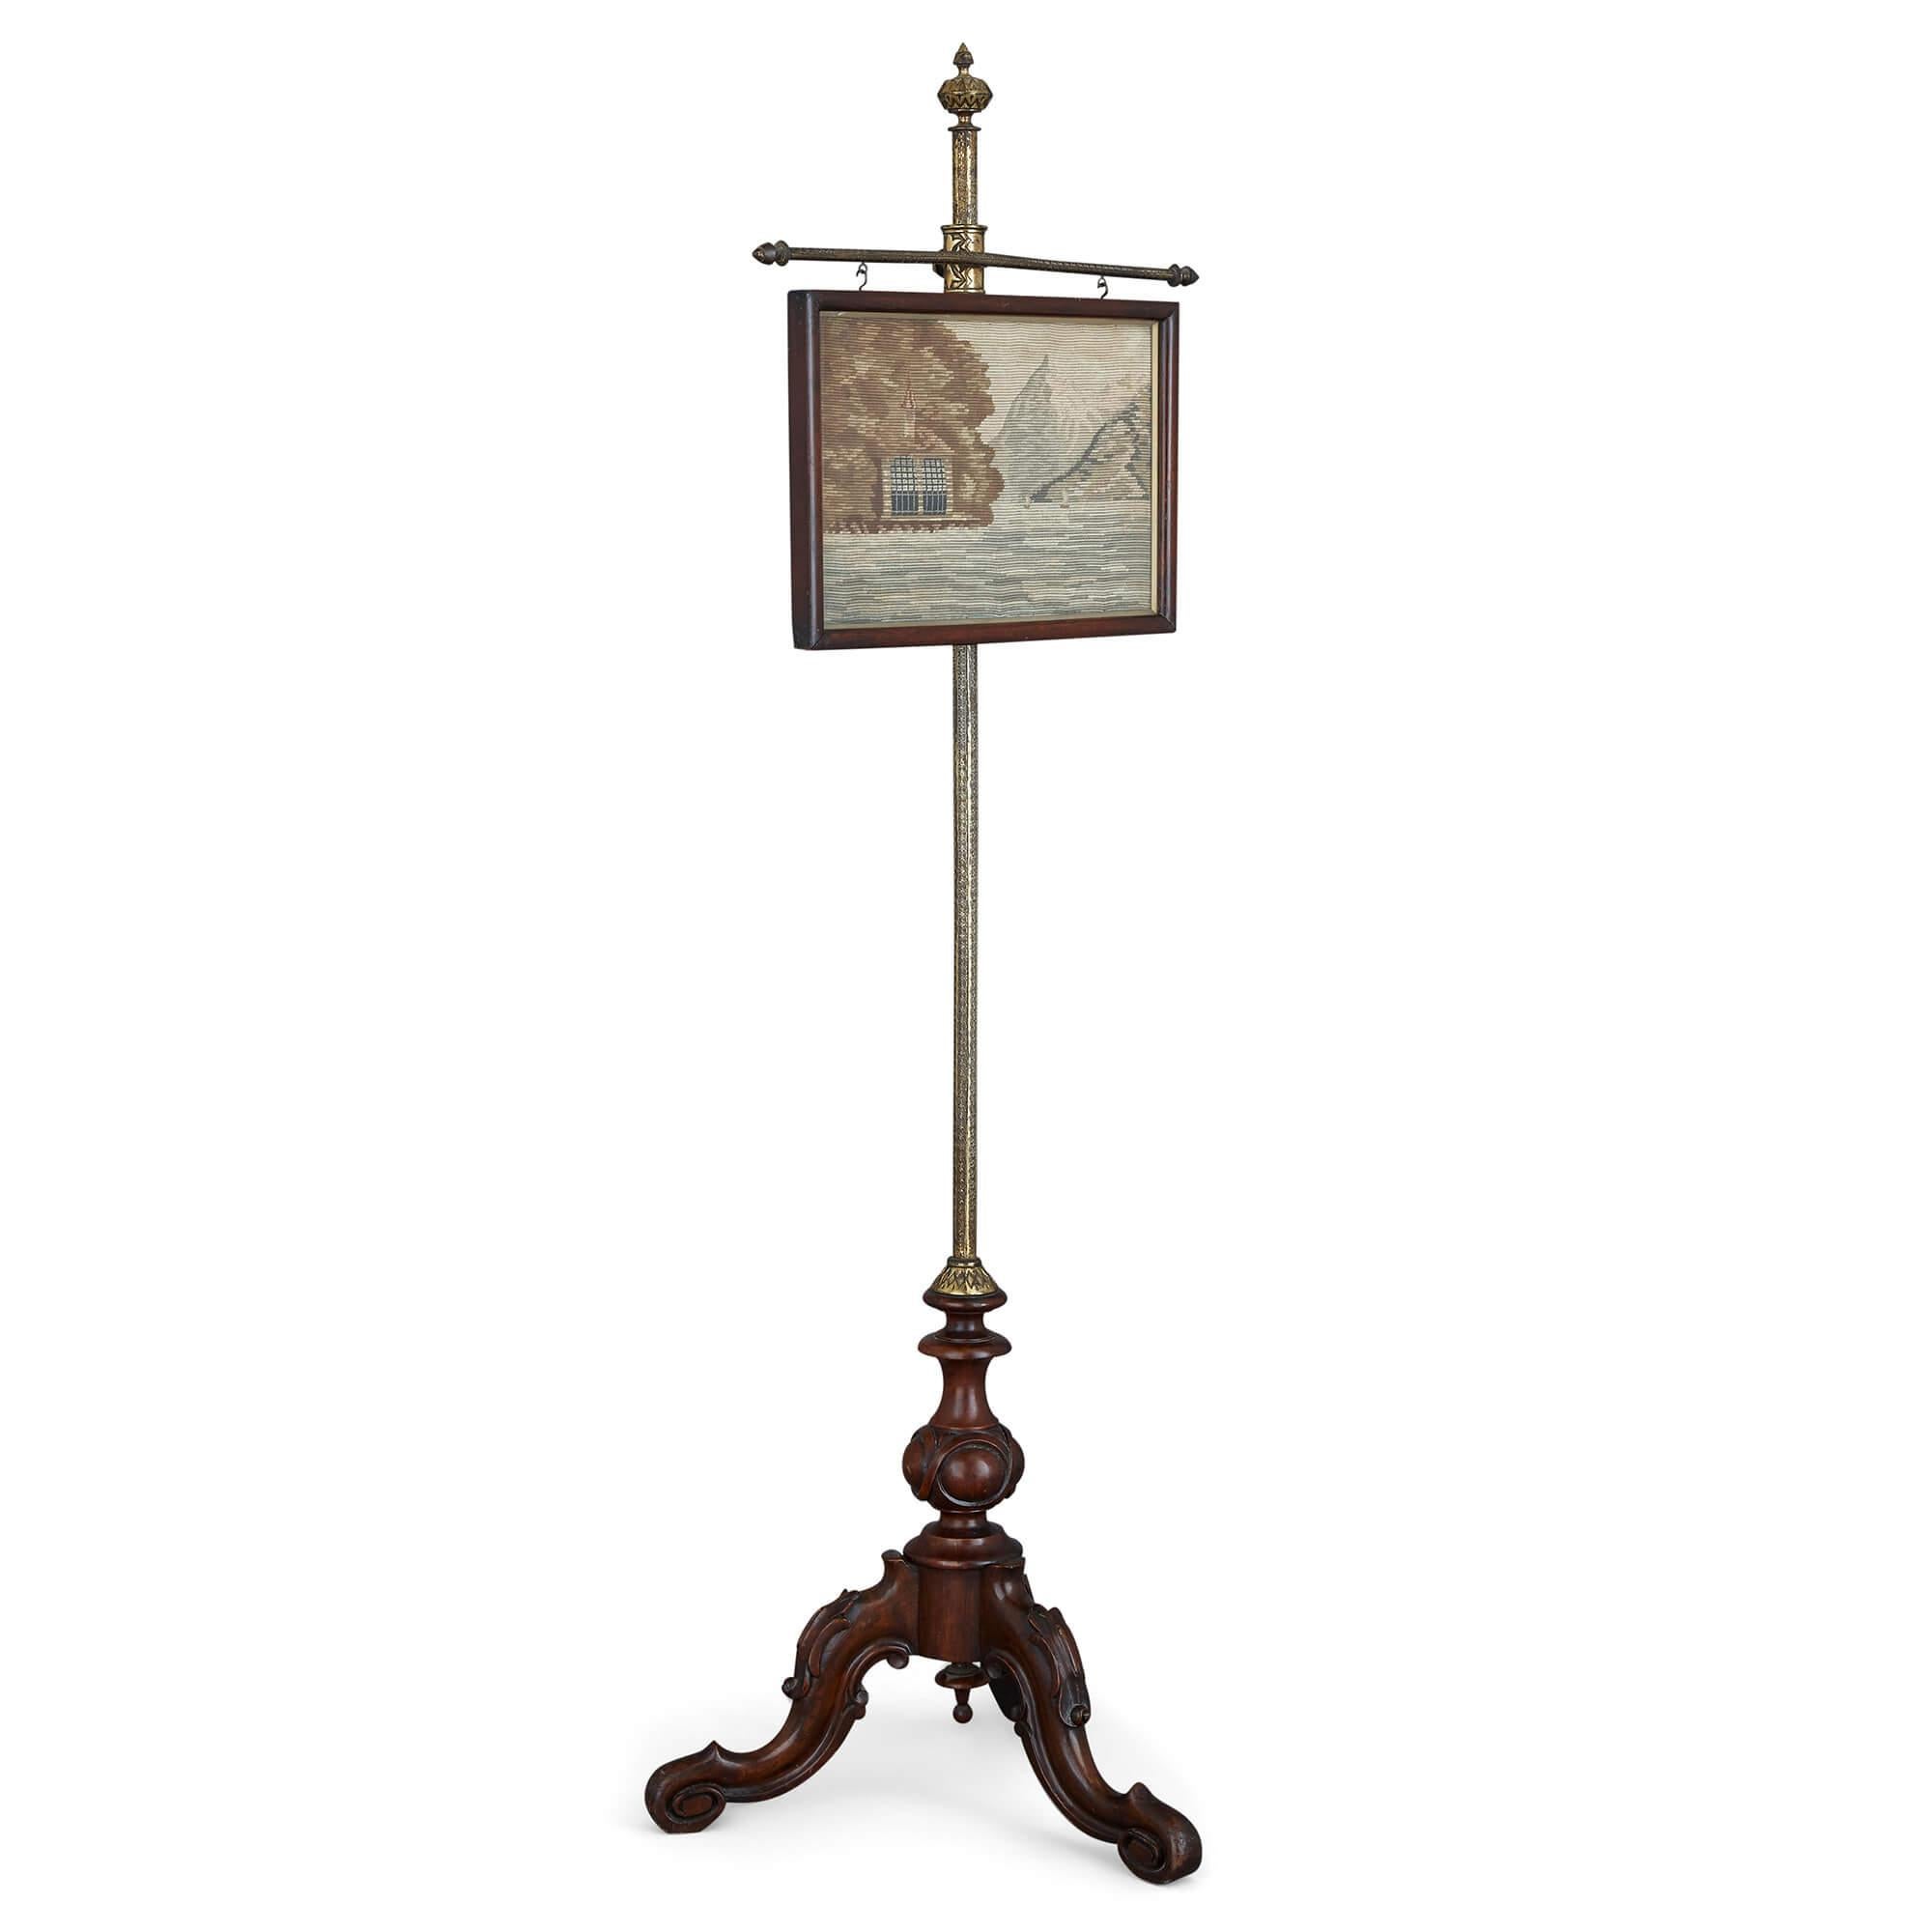 English adjustable tapestry and mahogany fire screen
English, c. 1860
Measures: Height 138cm, width 45cm, depth 40cm

This mahogany and gilt metal fire screen is supported on a wooden tripod base with an ornately decorated gilt metal stem. The